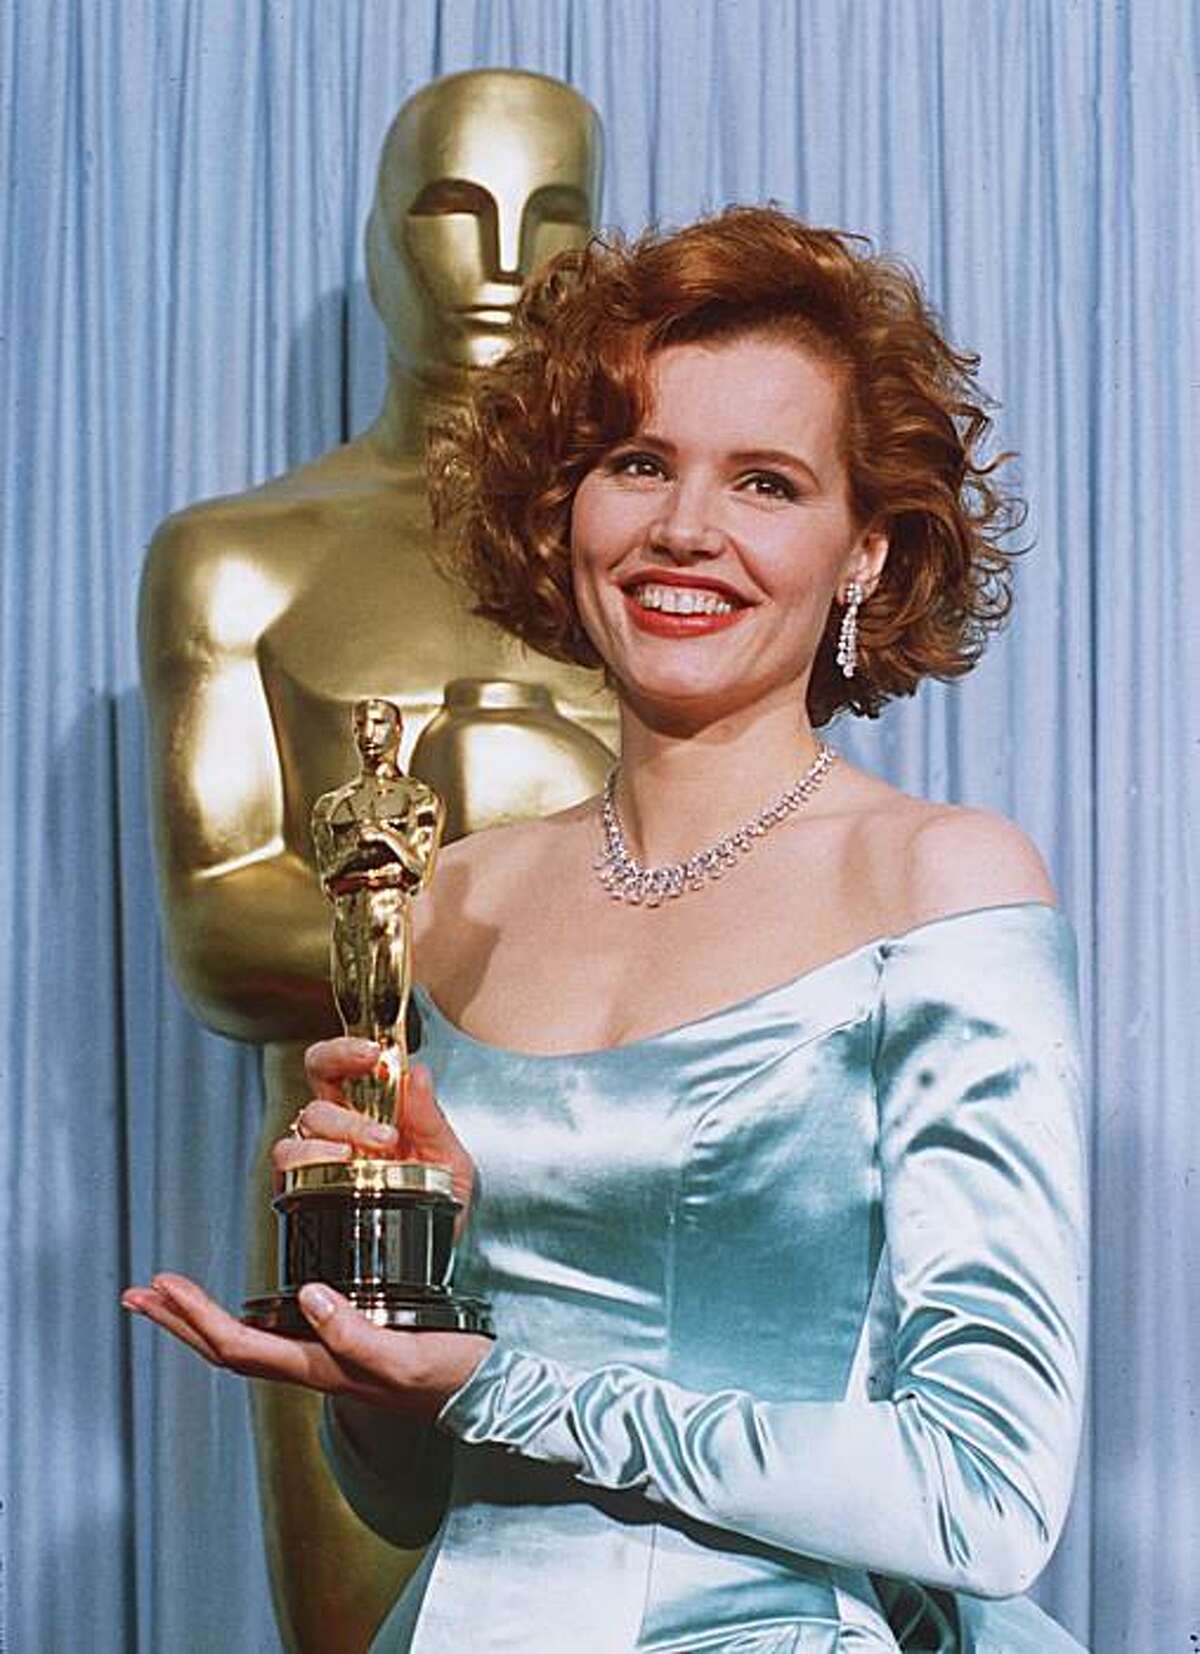 Geena Davis shows off her Oscar March 30, 1989 after winning Best Supporting Actress at the 61st Academy Awards for her role in the "Accidental Tourist." (AP Photo/ Lennox McLendon)